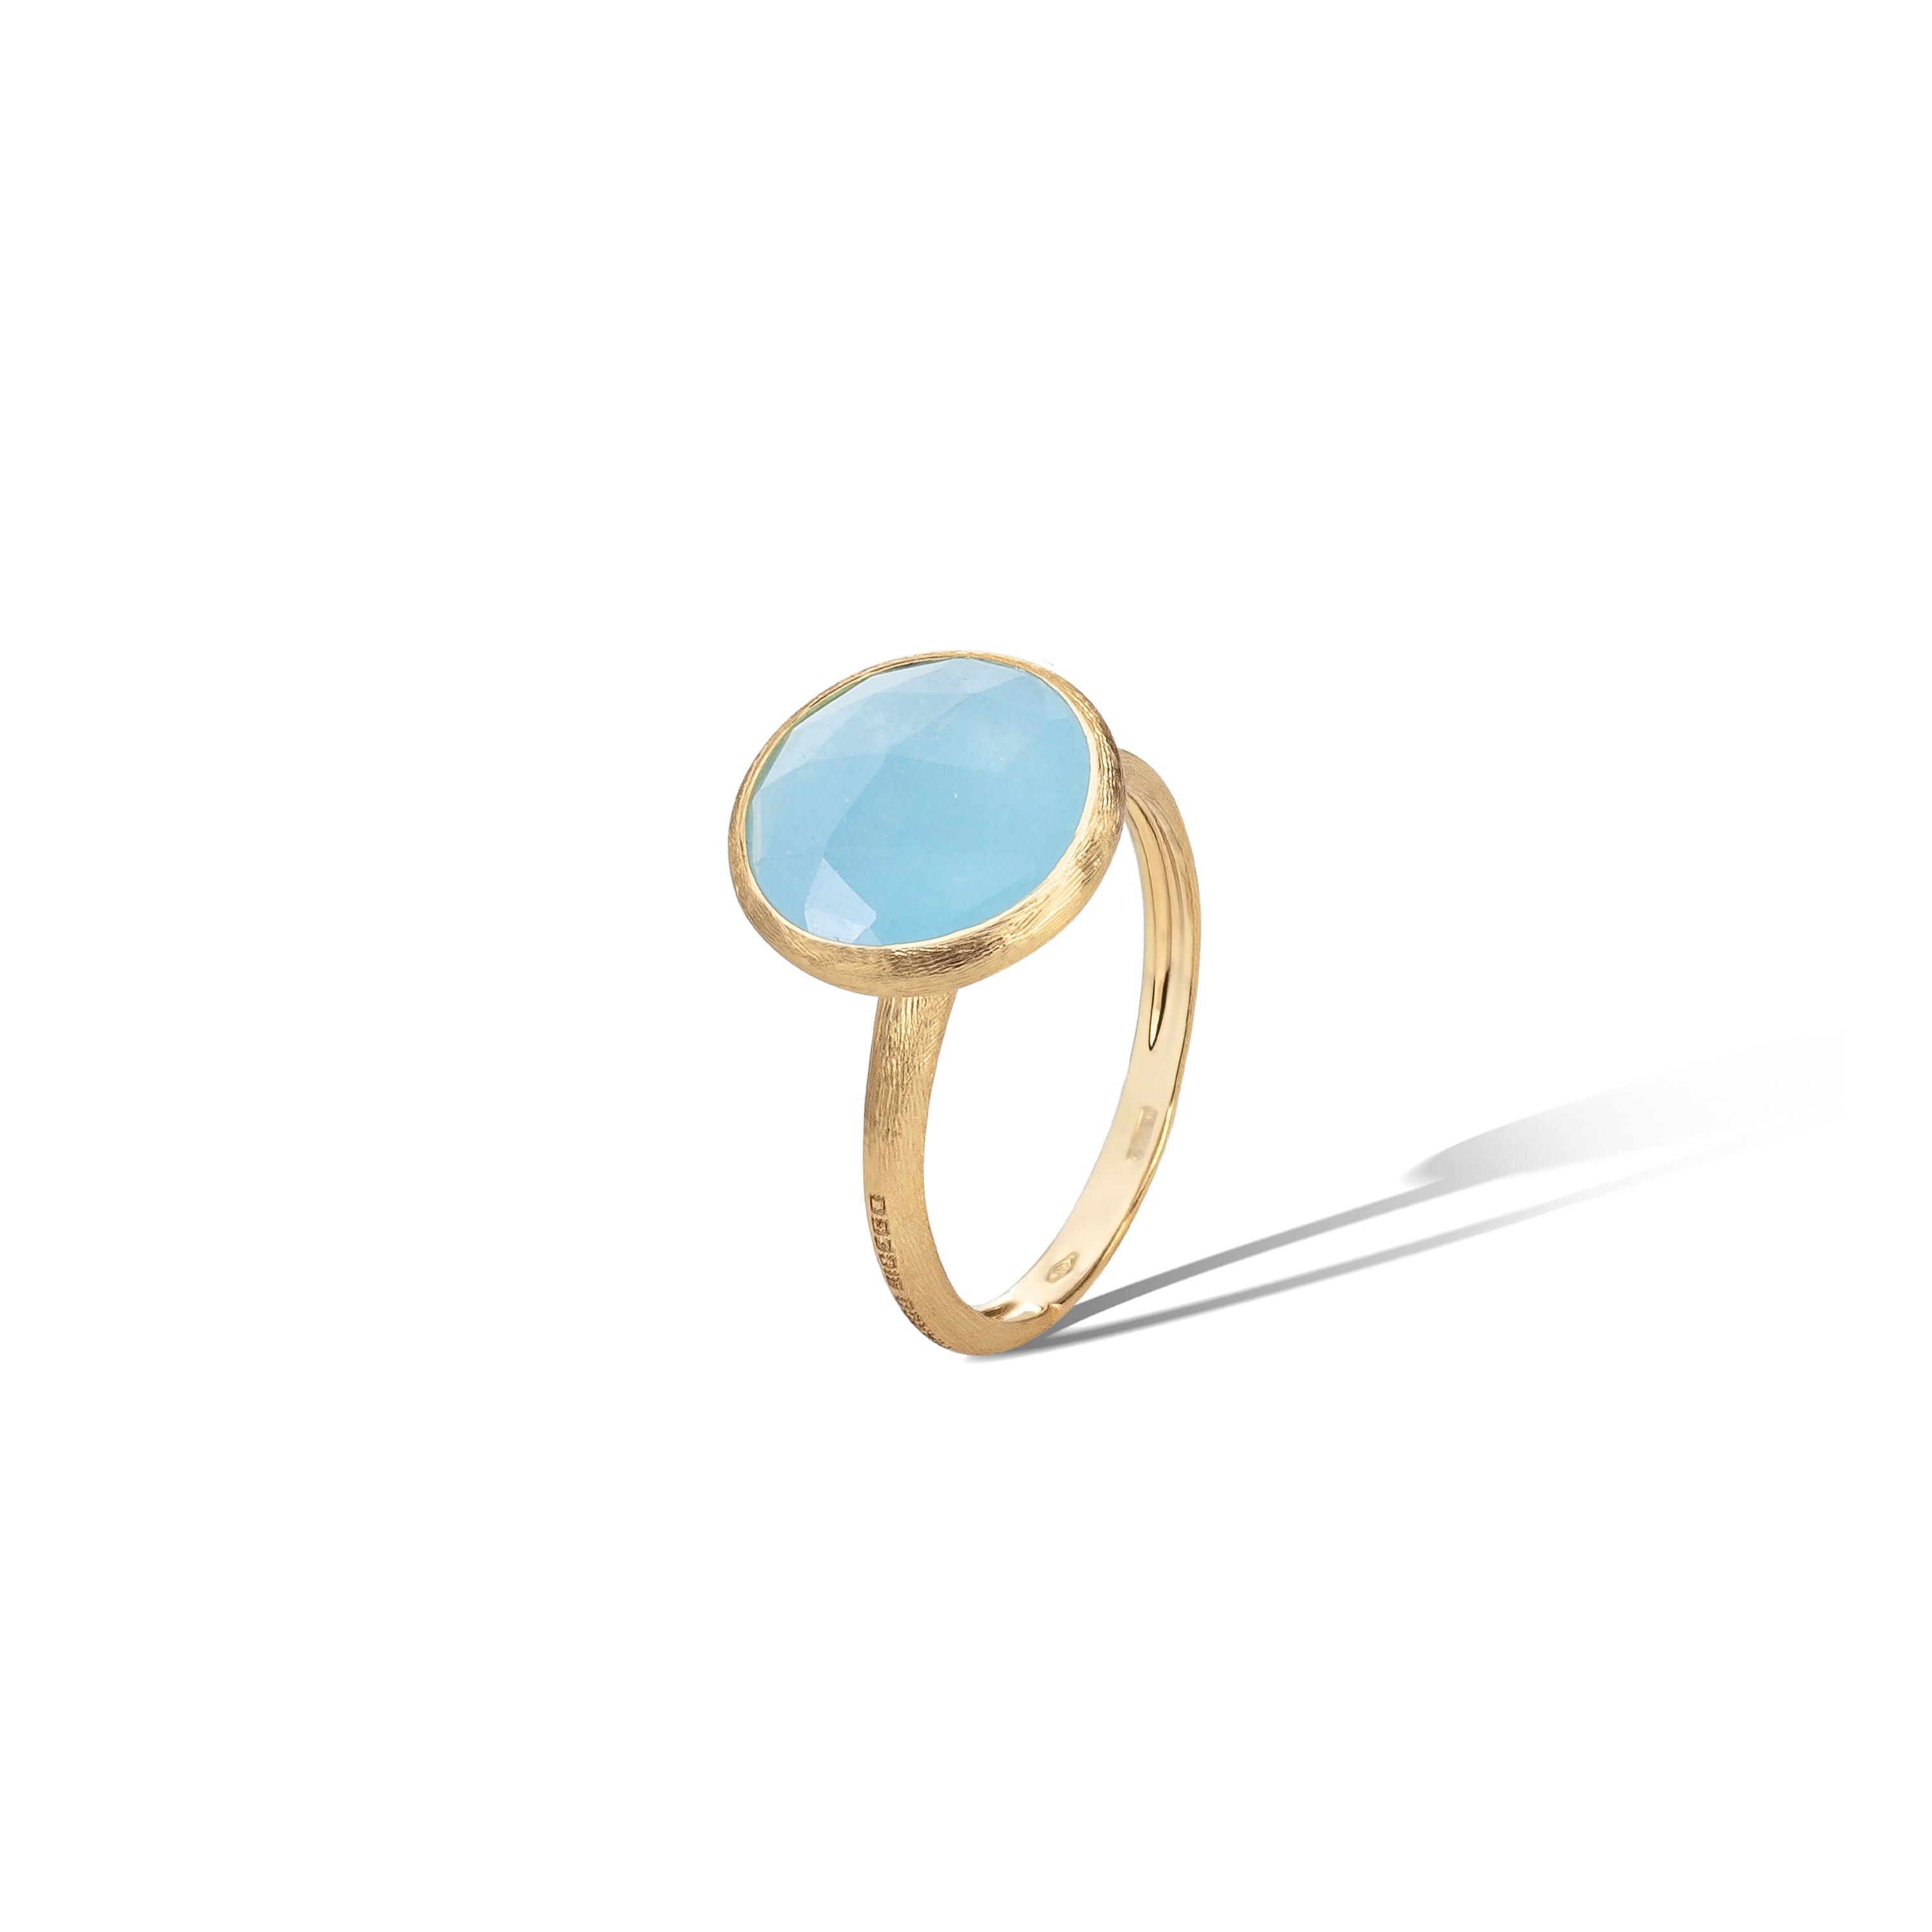 18K YELLOW GOLD AQUAMARINE RING FROM THE JAIPUR COLLECTION